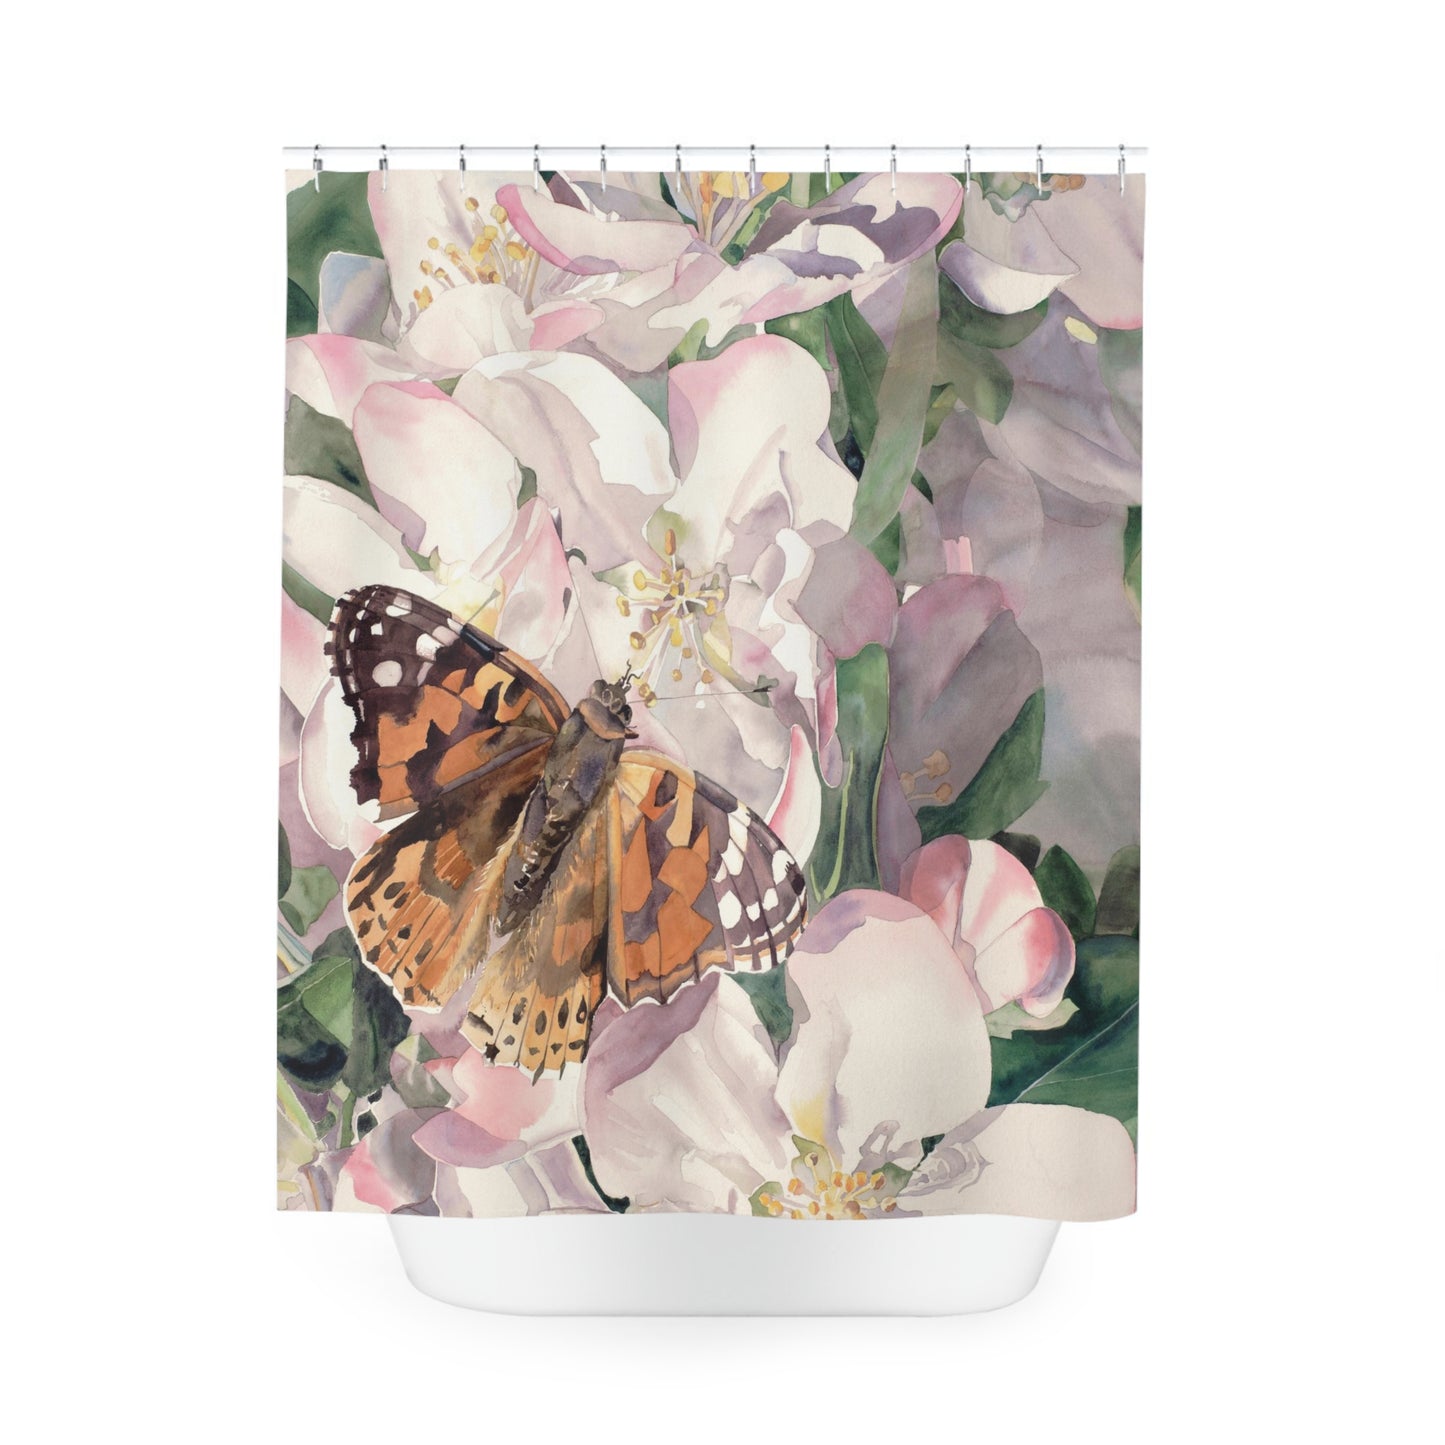 Copy of "Spring Traveler" Polyester Shower Curtain